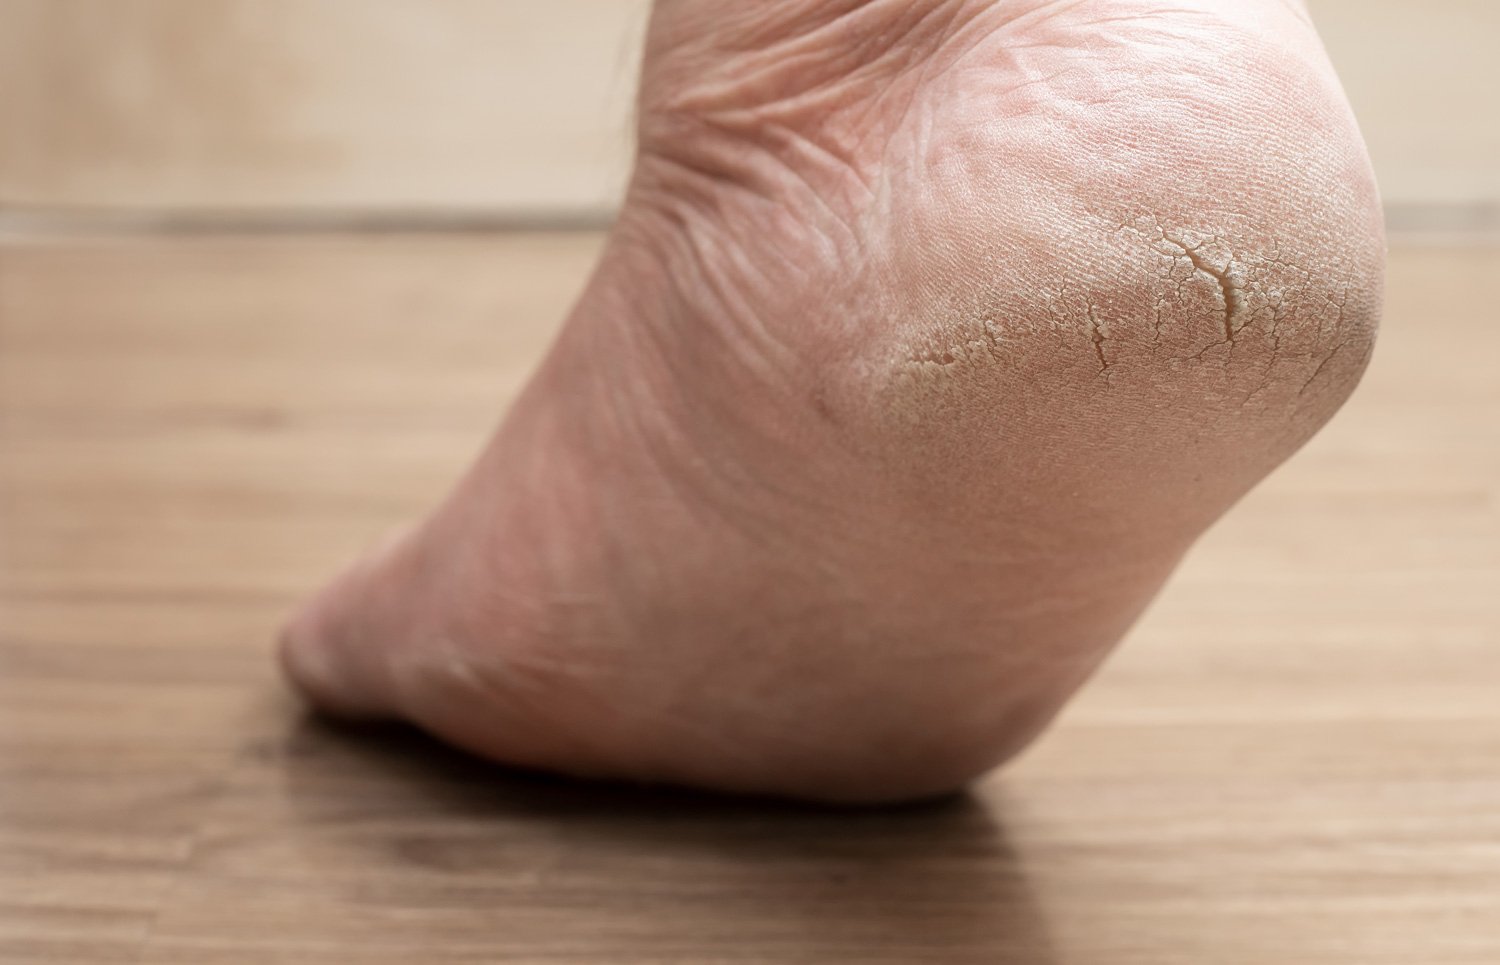 17,681 Cracked Feet Royalty-Free Photos and Stock Images | Shutterstock